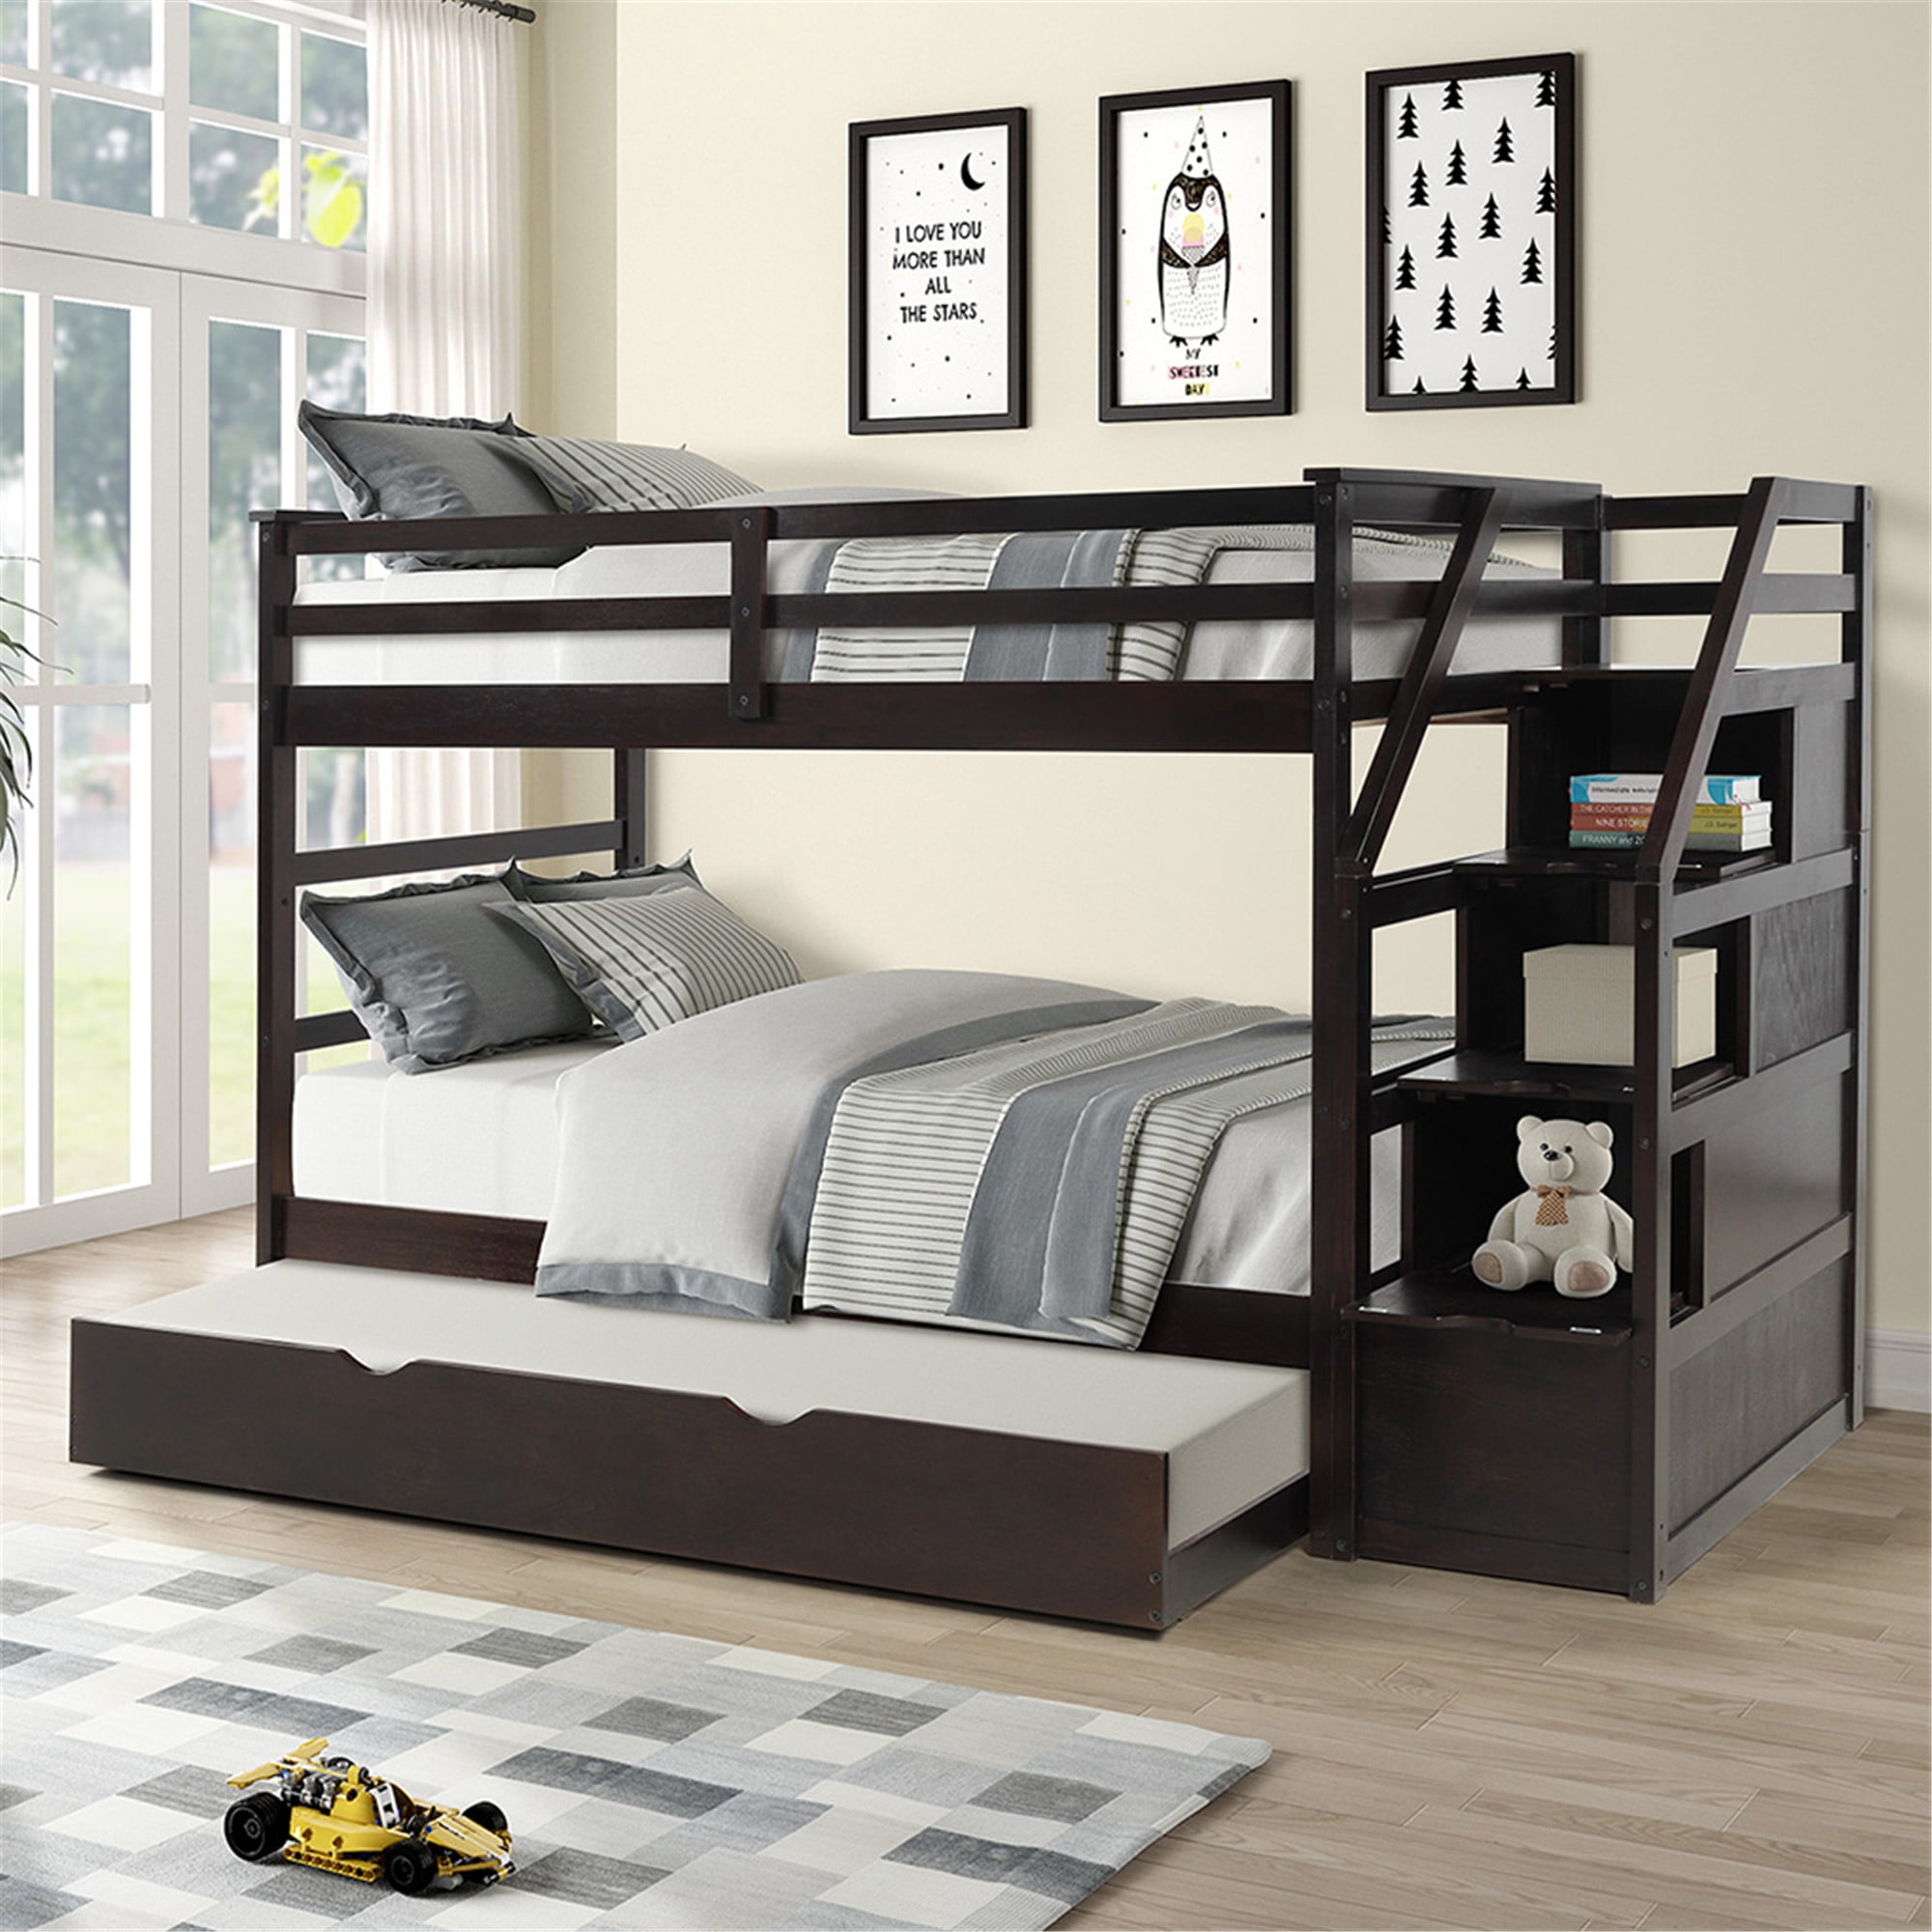 double twin bed